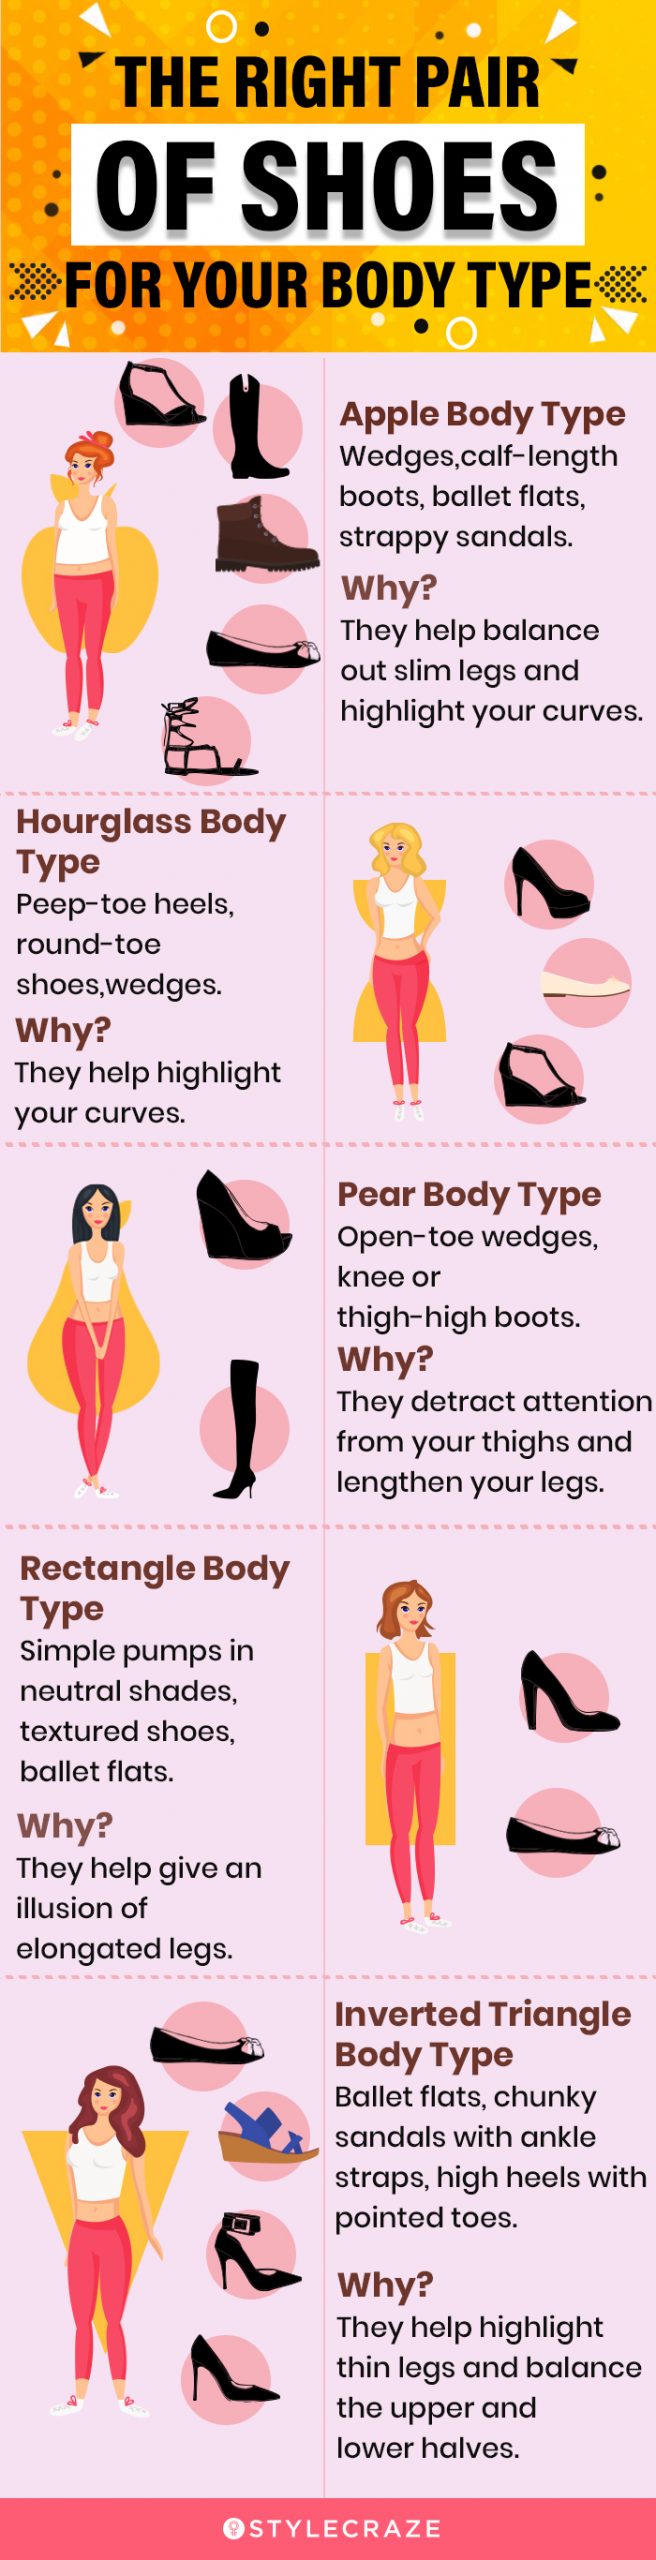 the right pair of shoes for your body type (infographic)